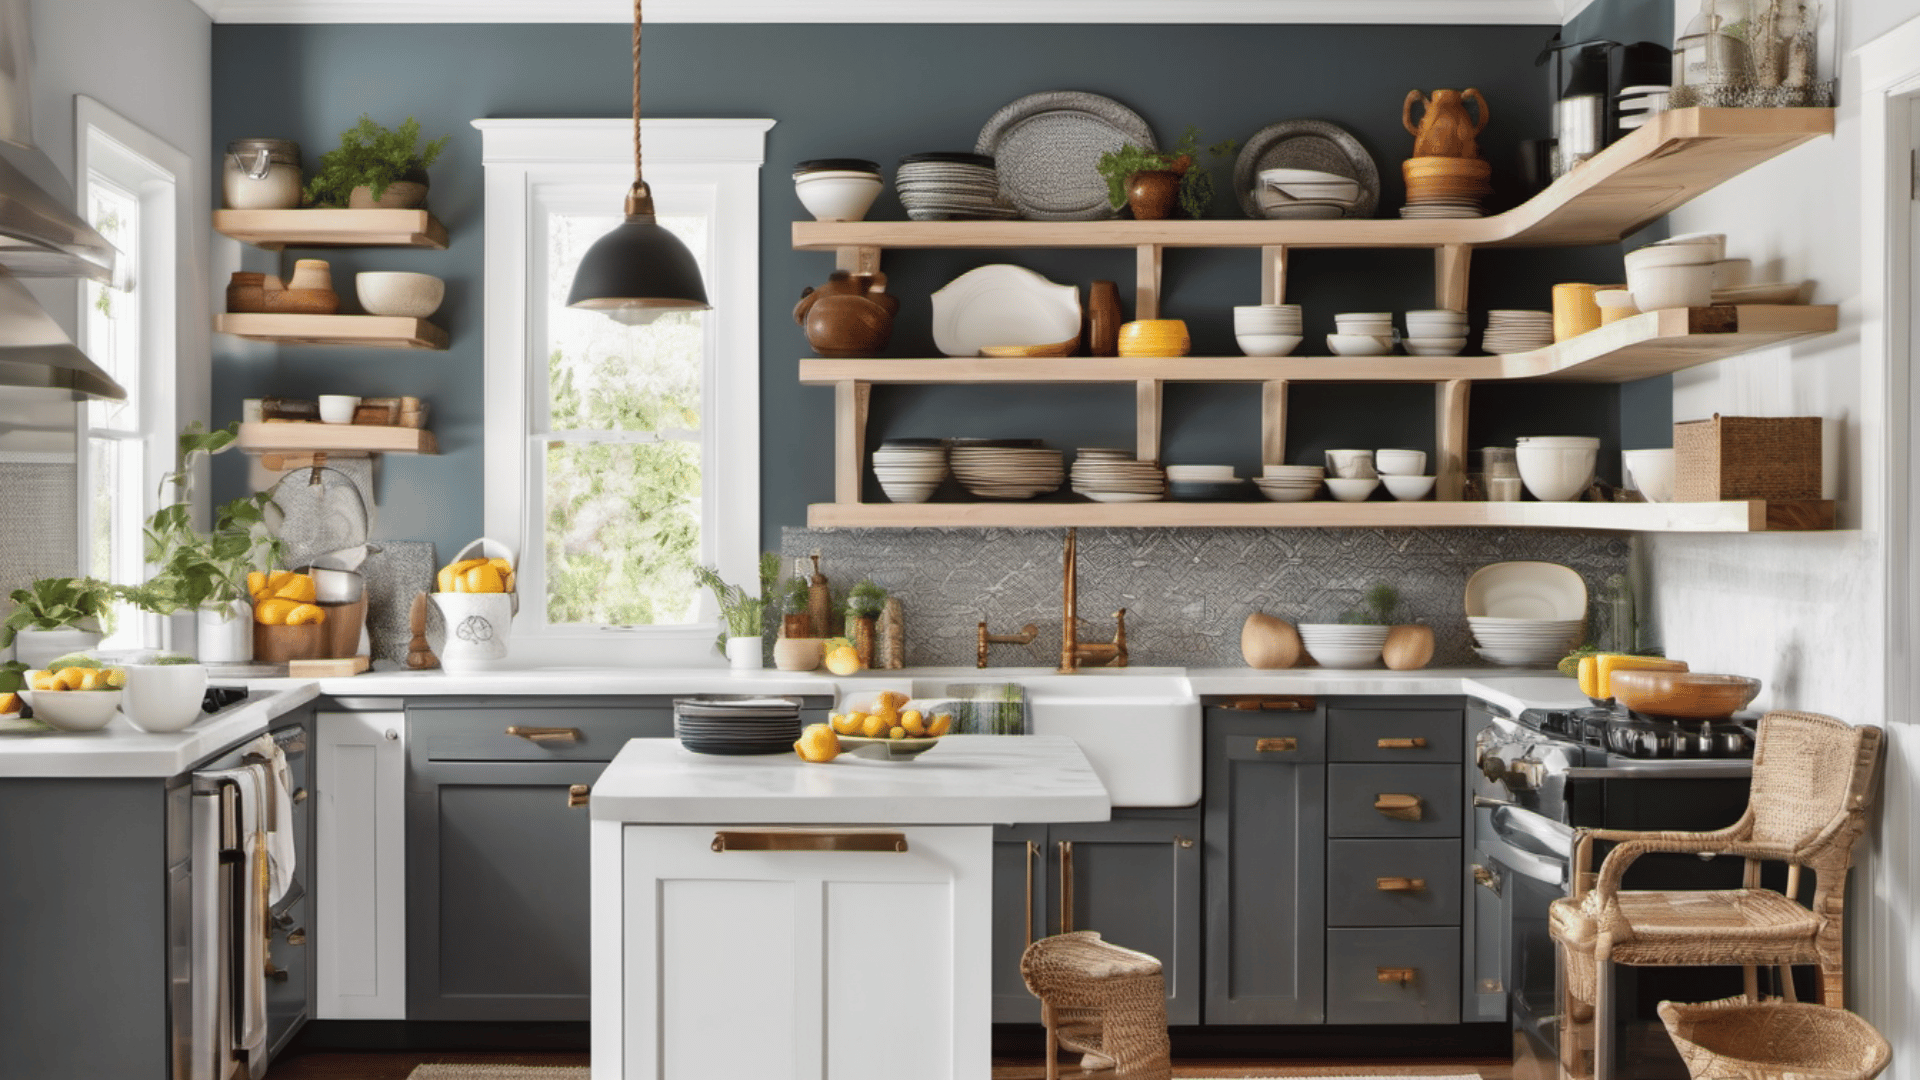 Incorporating color and texture into kitchen shelf decor